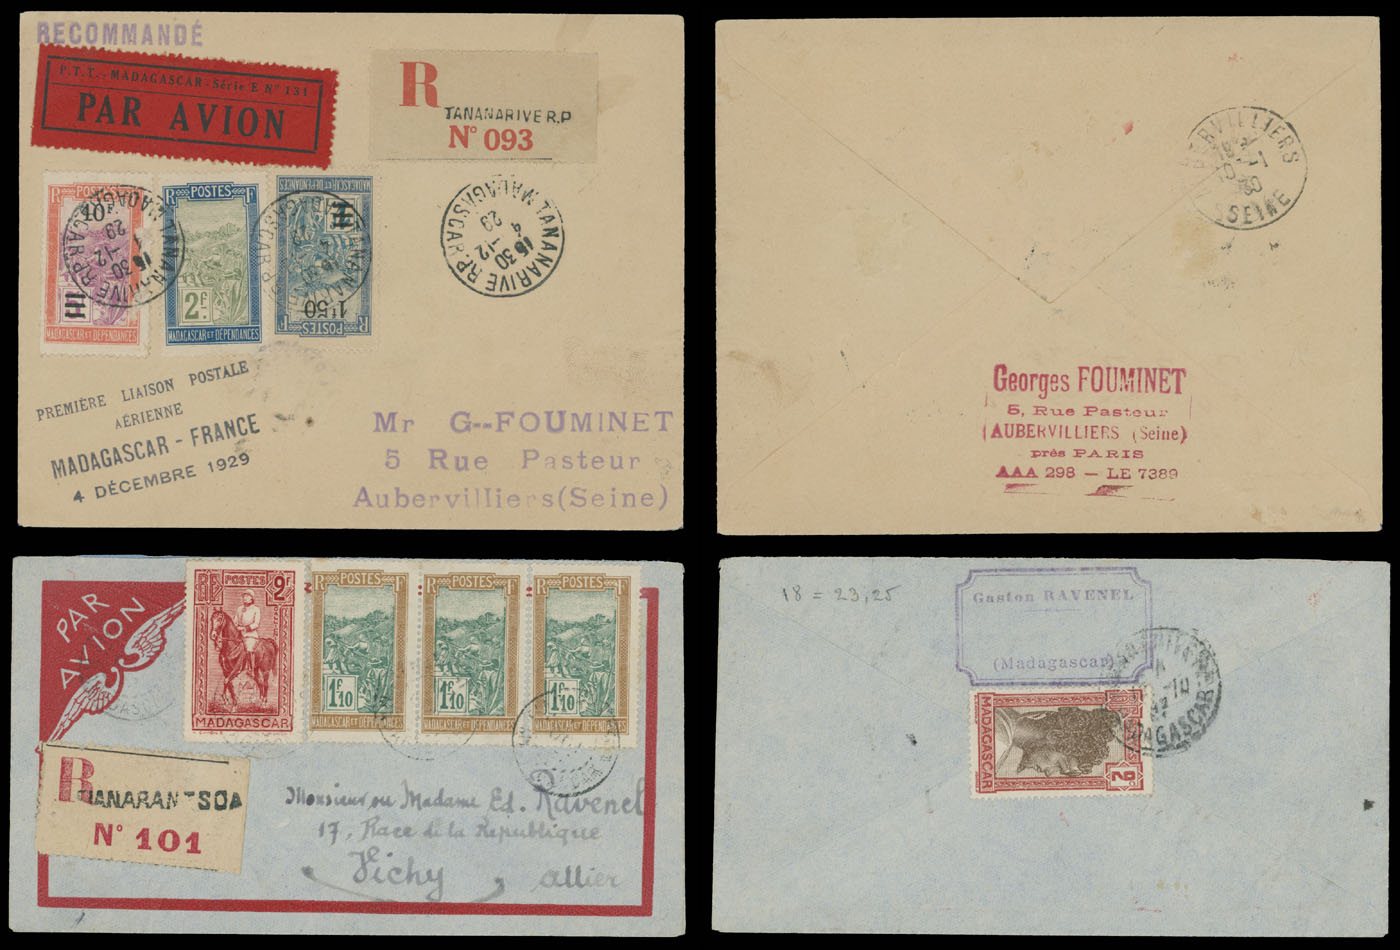 Lot 76 - 1. Worldwide Air Post Stamps and Postal History madagascar -  Raritan Stamps Inc. Auction #95 Worldwide Air Post Stamps and Philatelic Rarities of the World